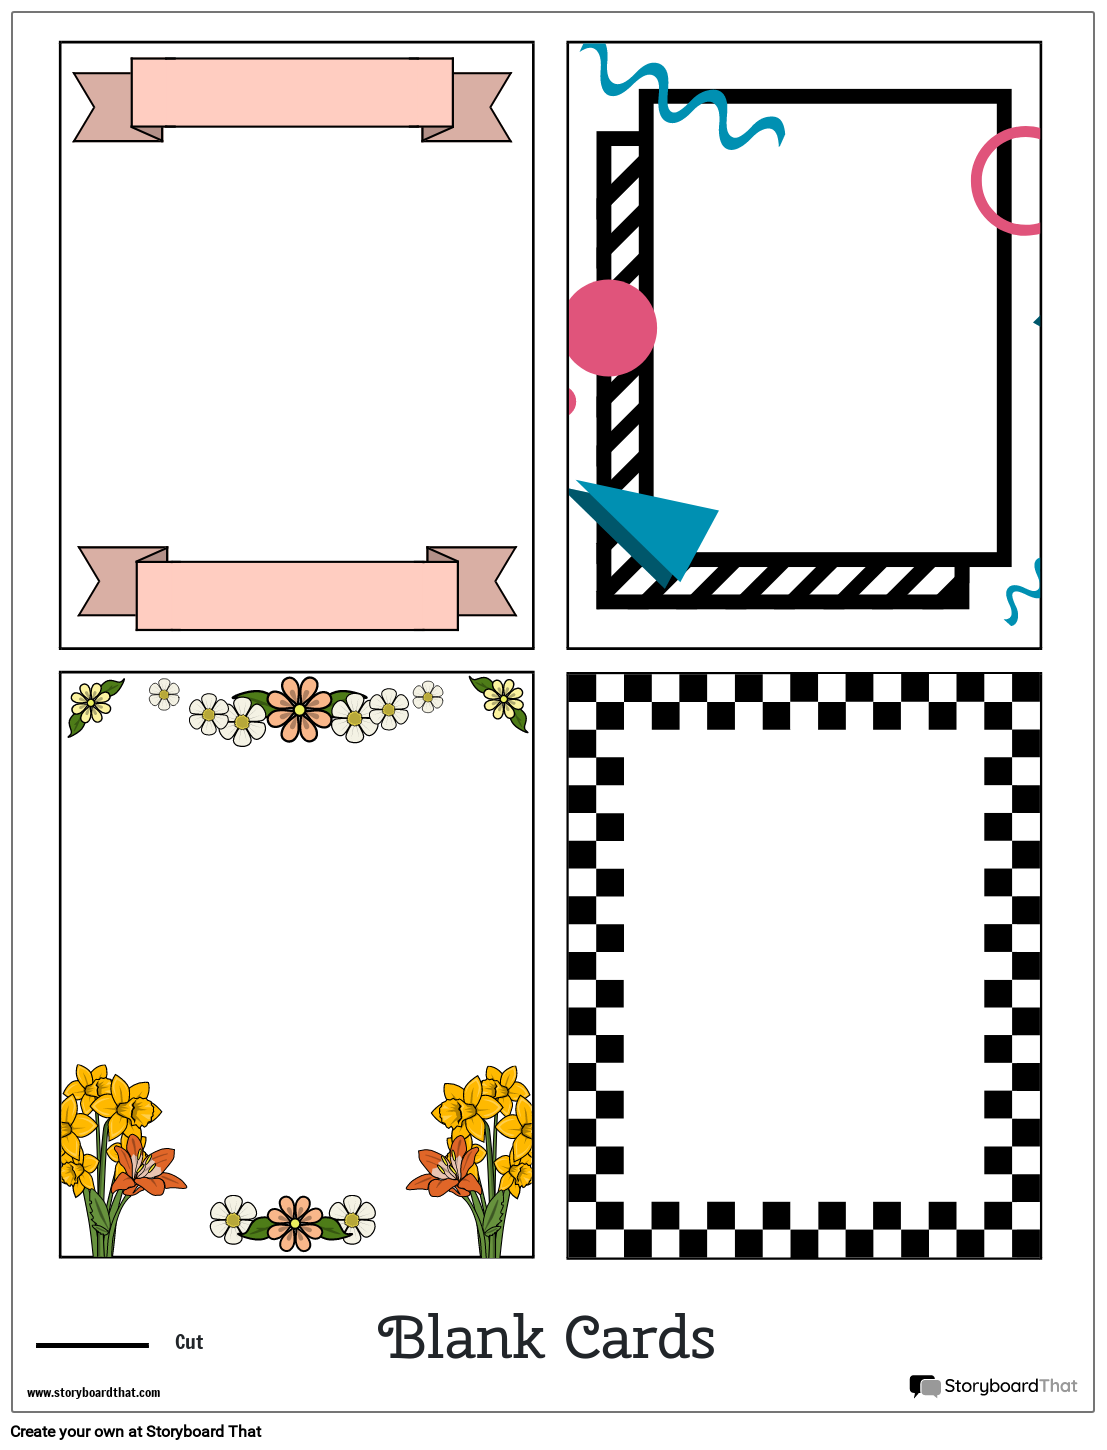 Colorful Flowers and Patterns Based Card Worksheet